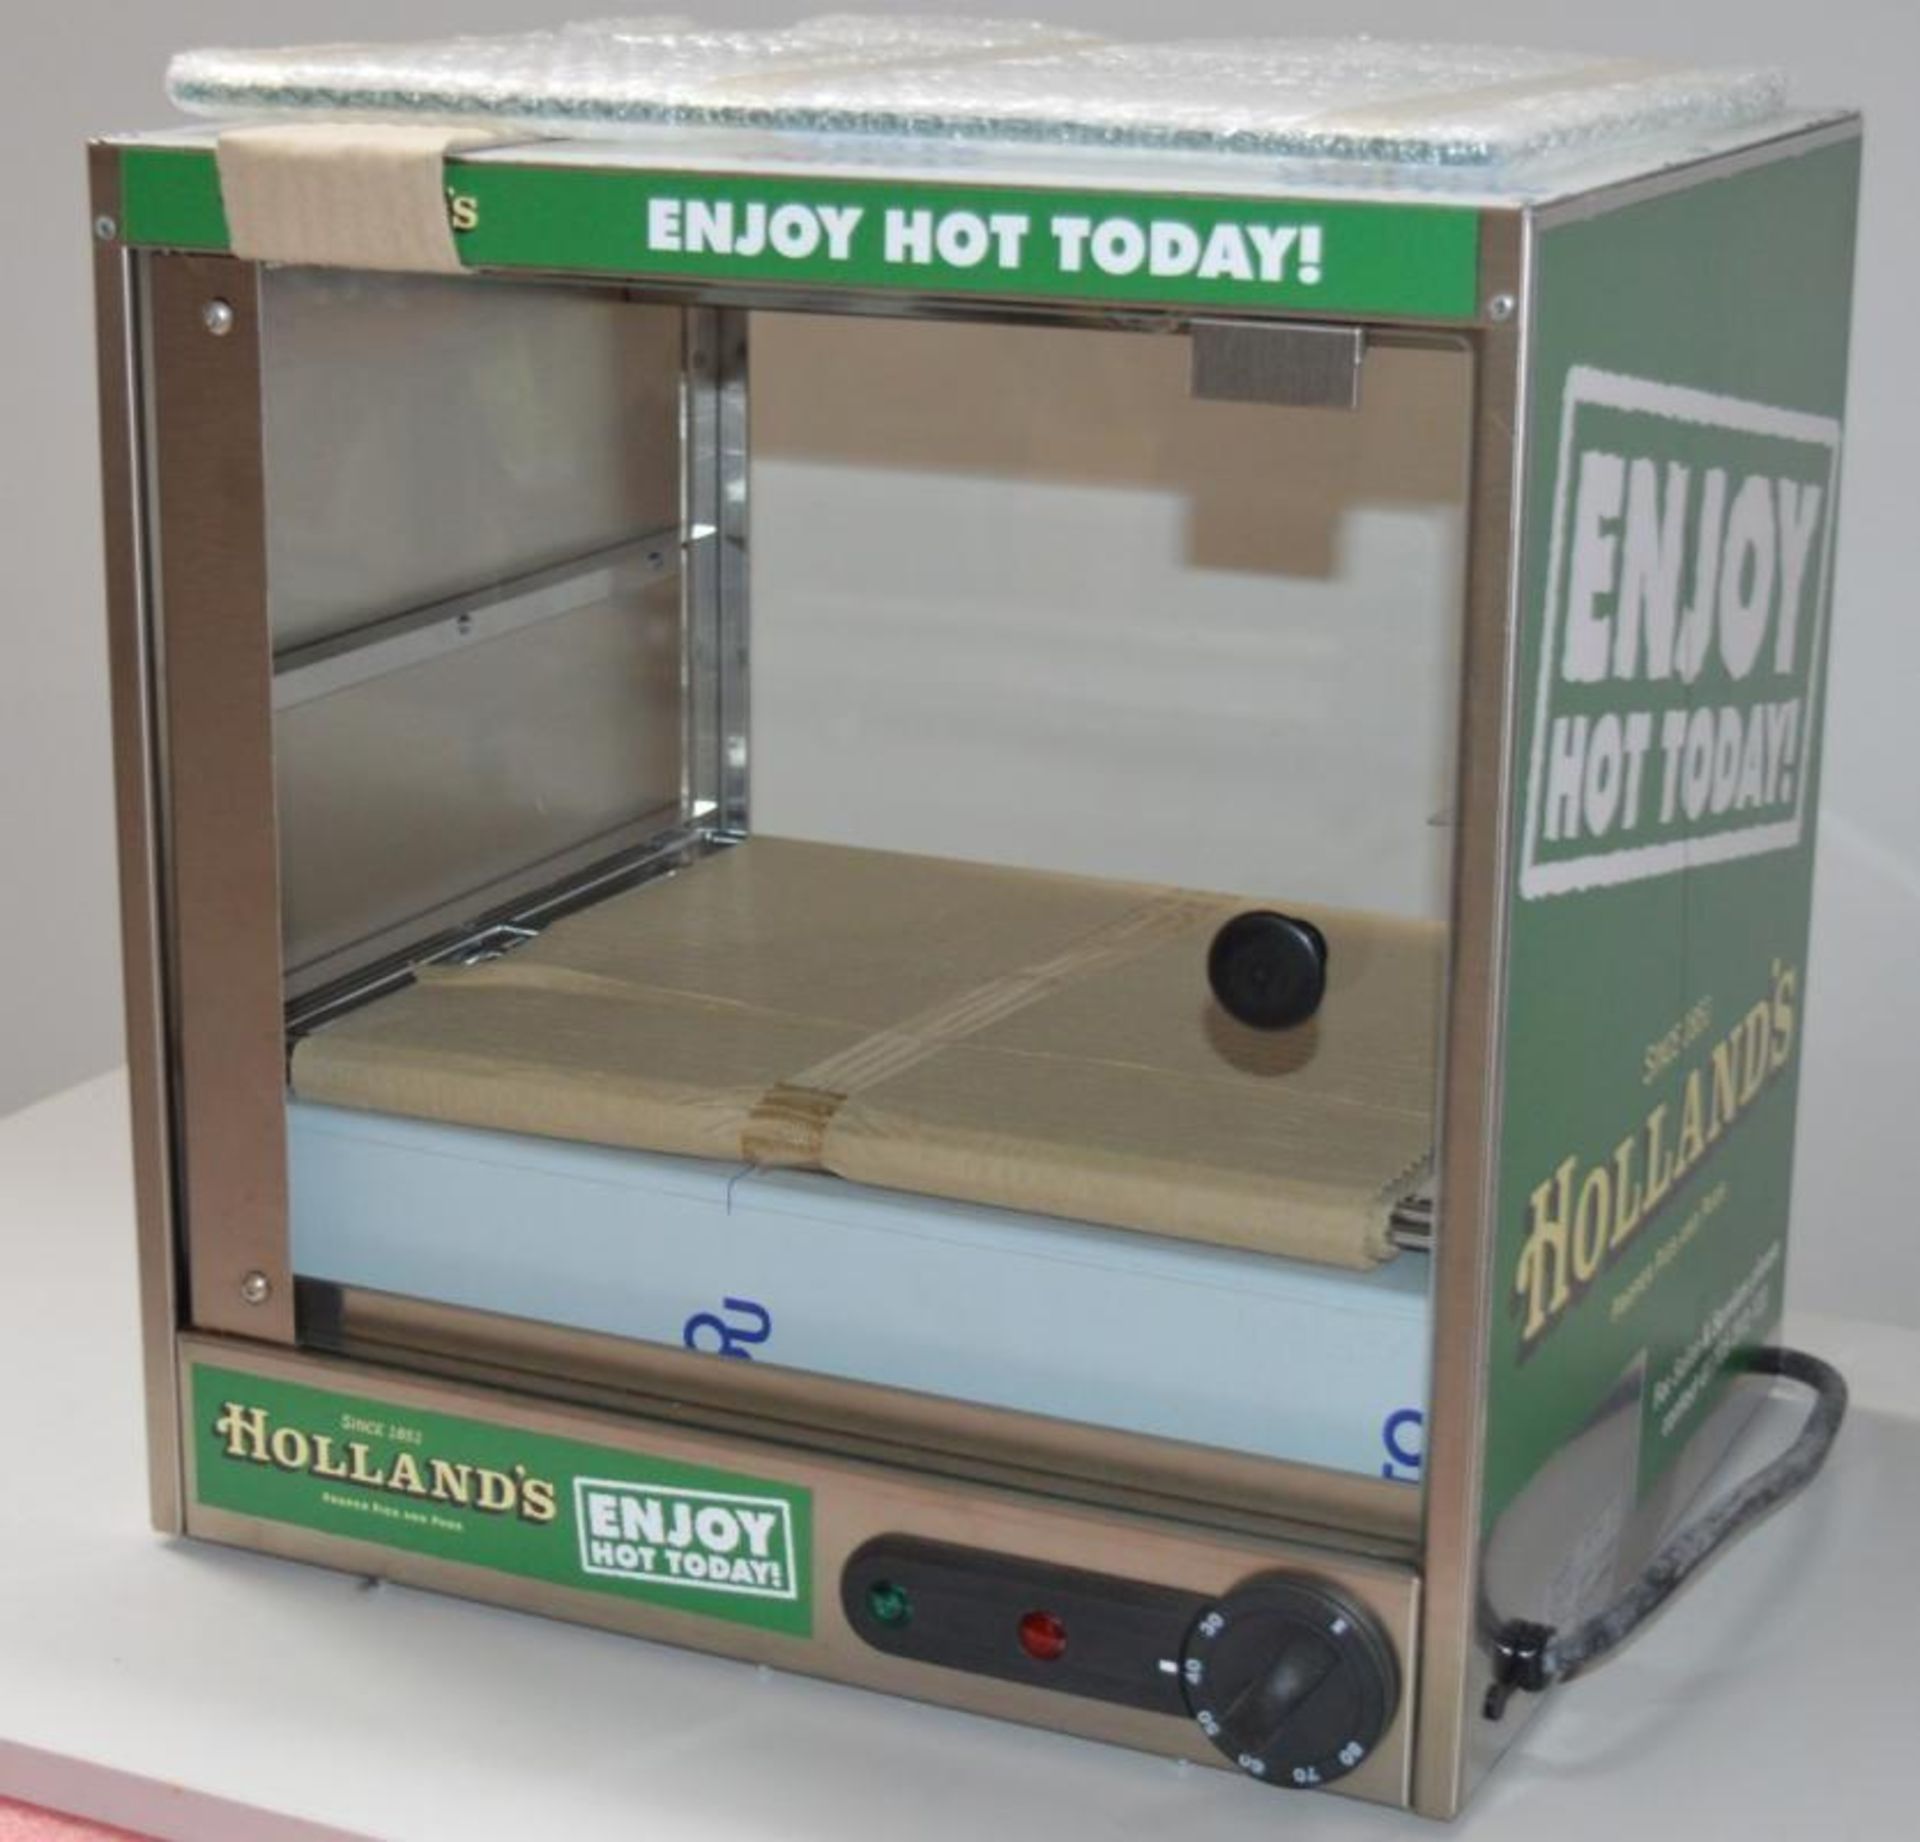 1 x Parry Electric Pie Warming Cabinet - Hollands Pie Edition - New and Unused - Features Stainless - Image 9 of 9